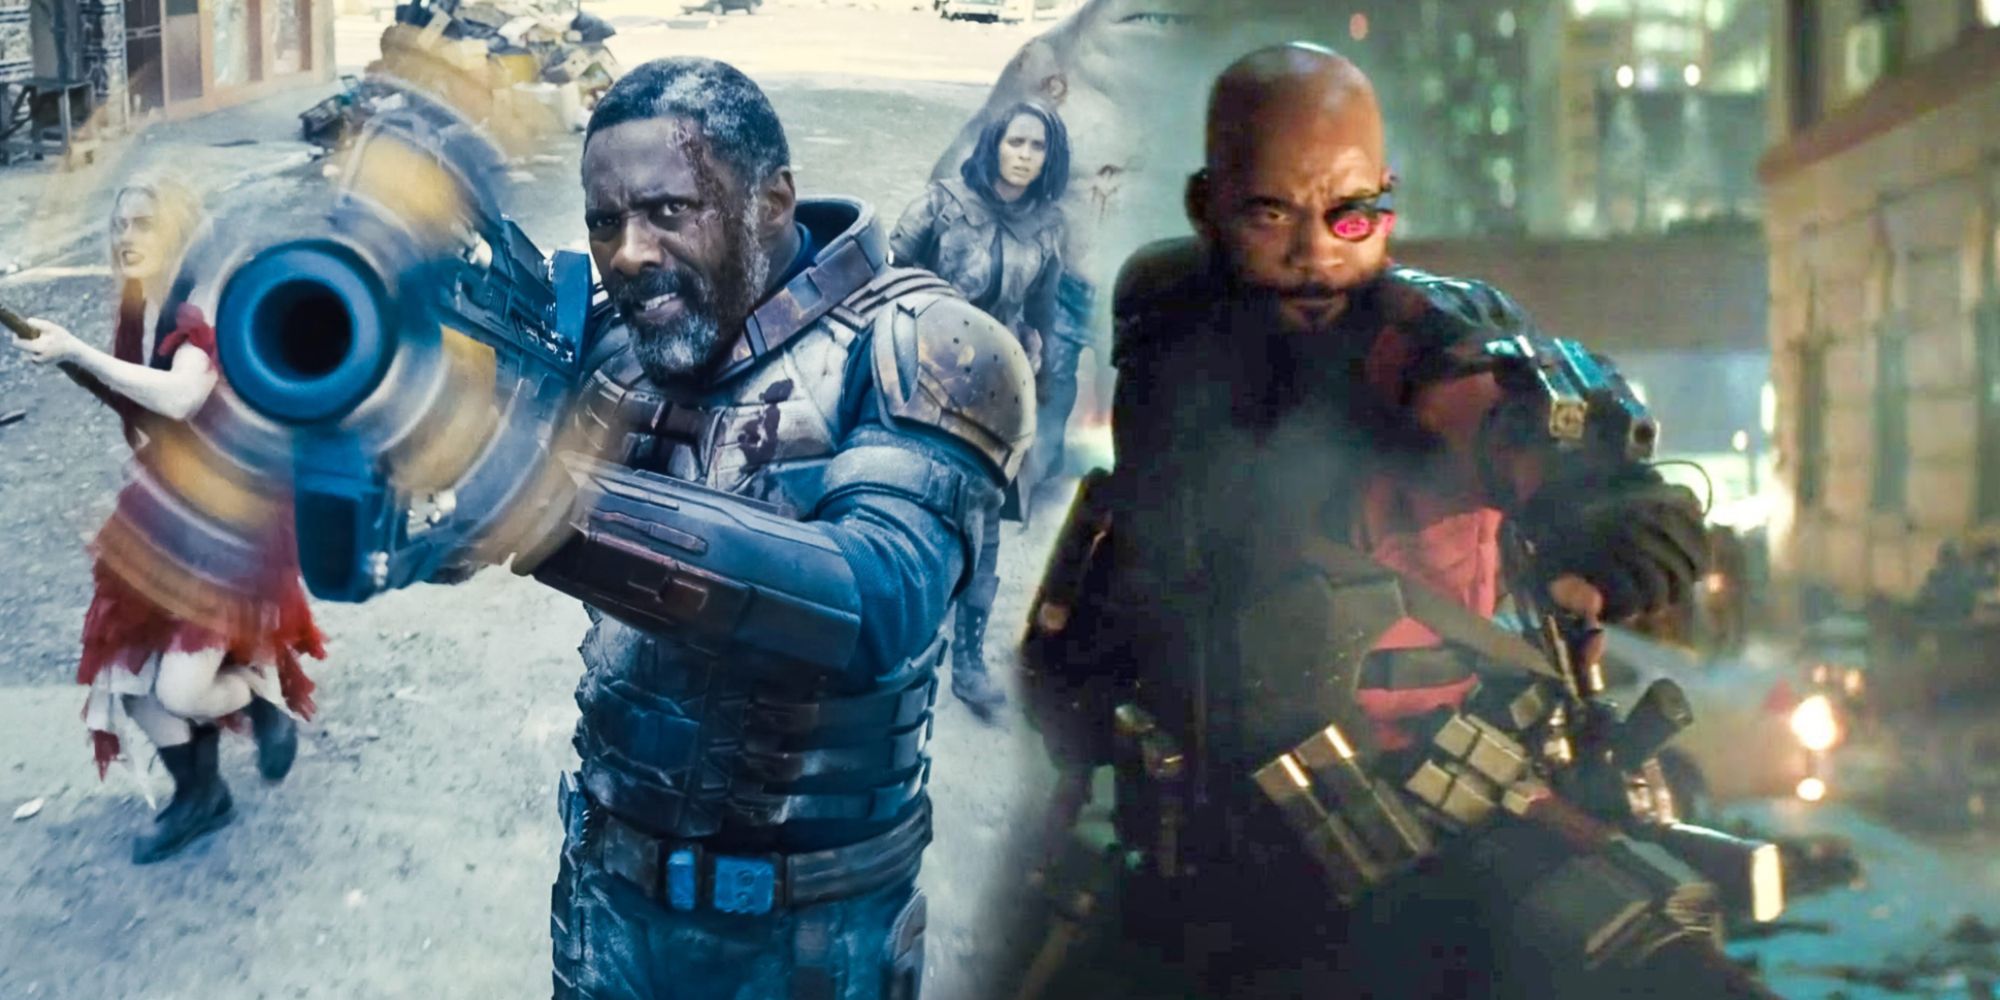 Deadshot and Bloodsport's Weapons in The Suicide Squad Movies